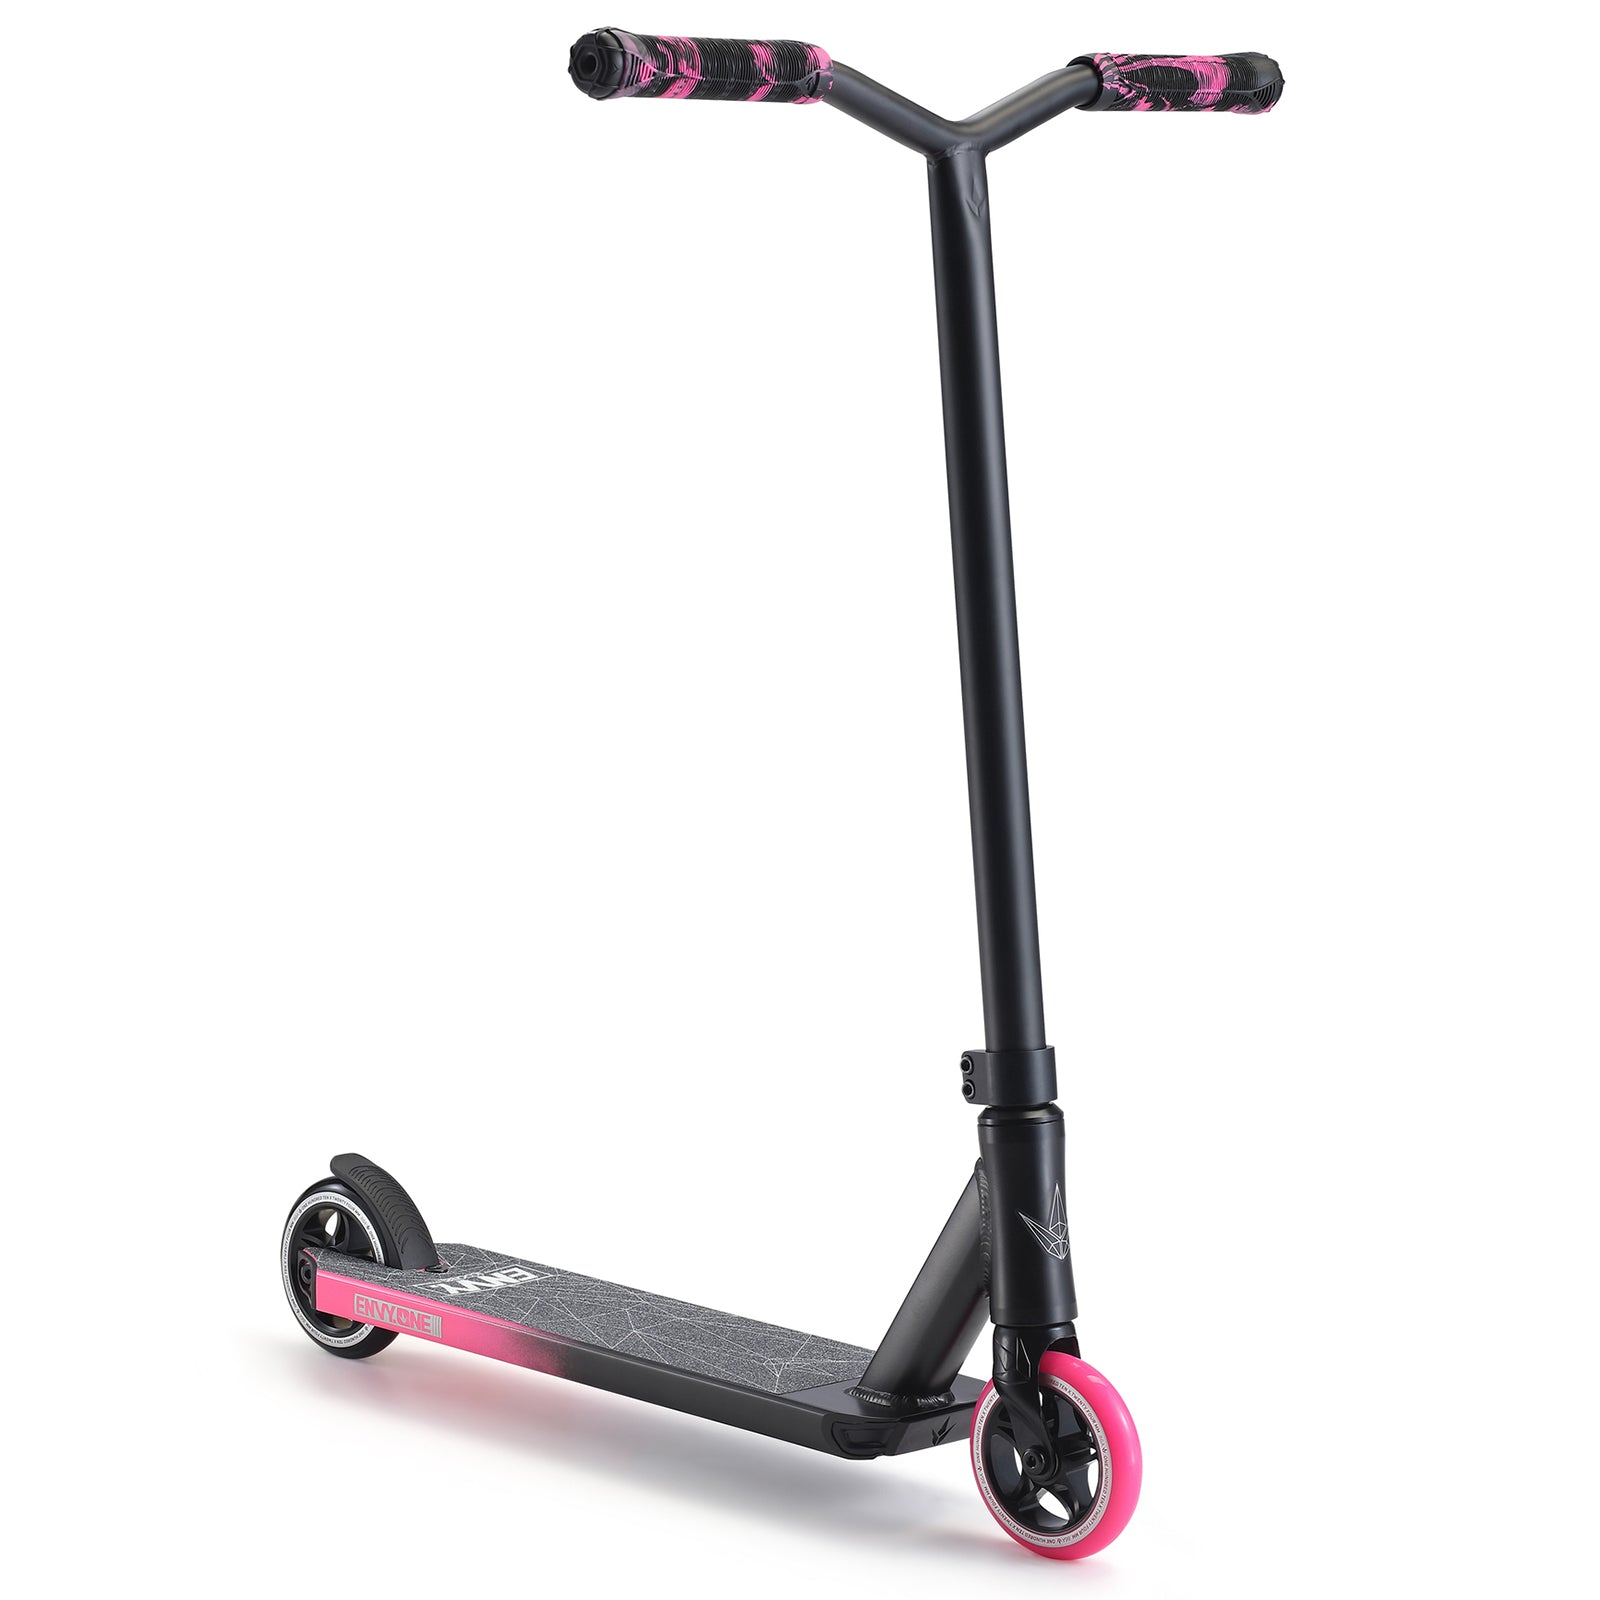 Envy One S3 Black/Pink Complete Scooter